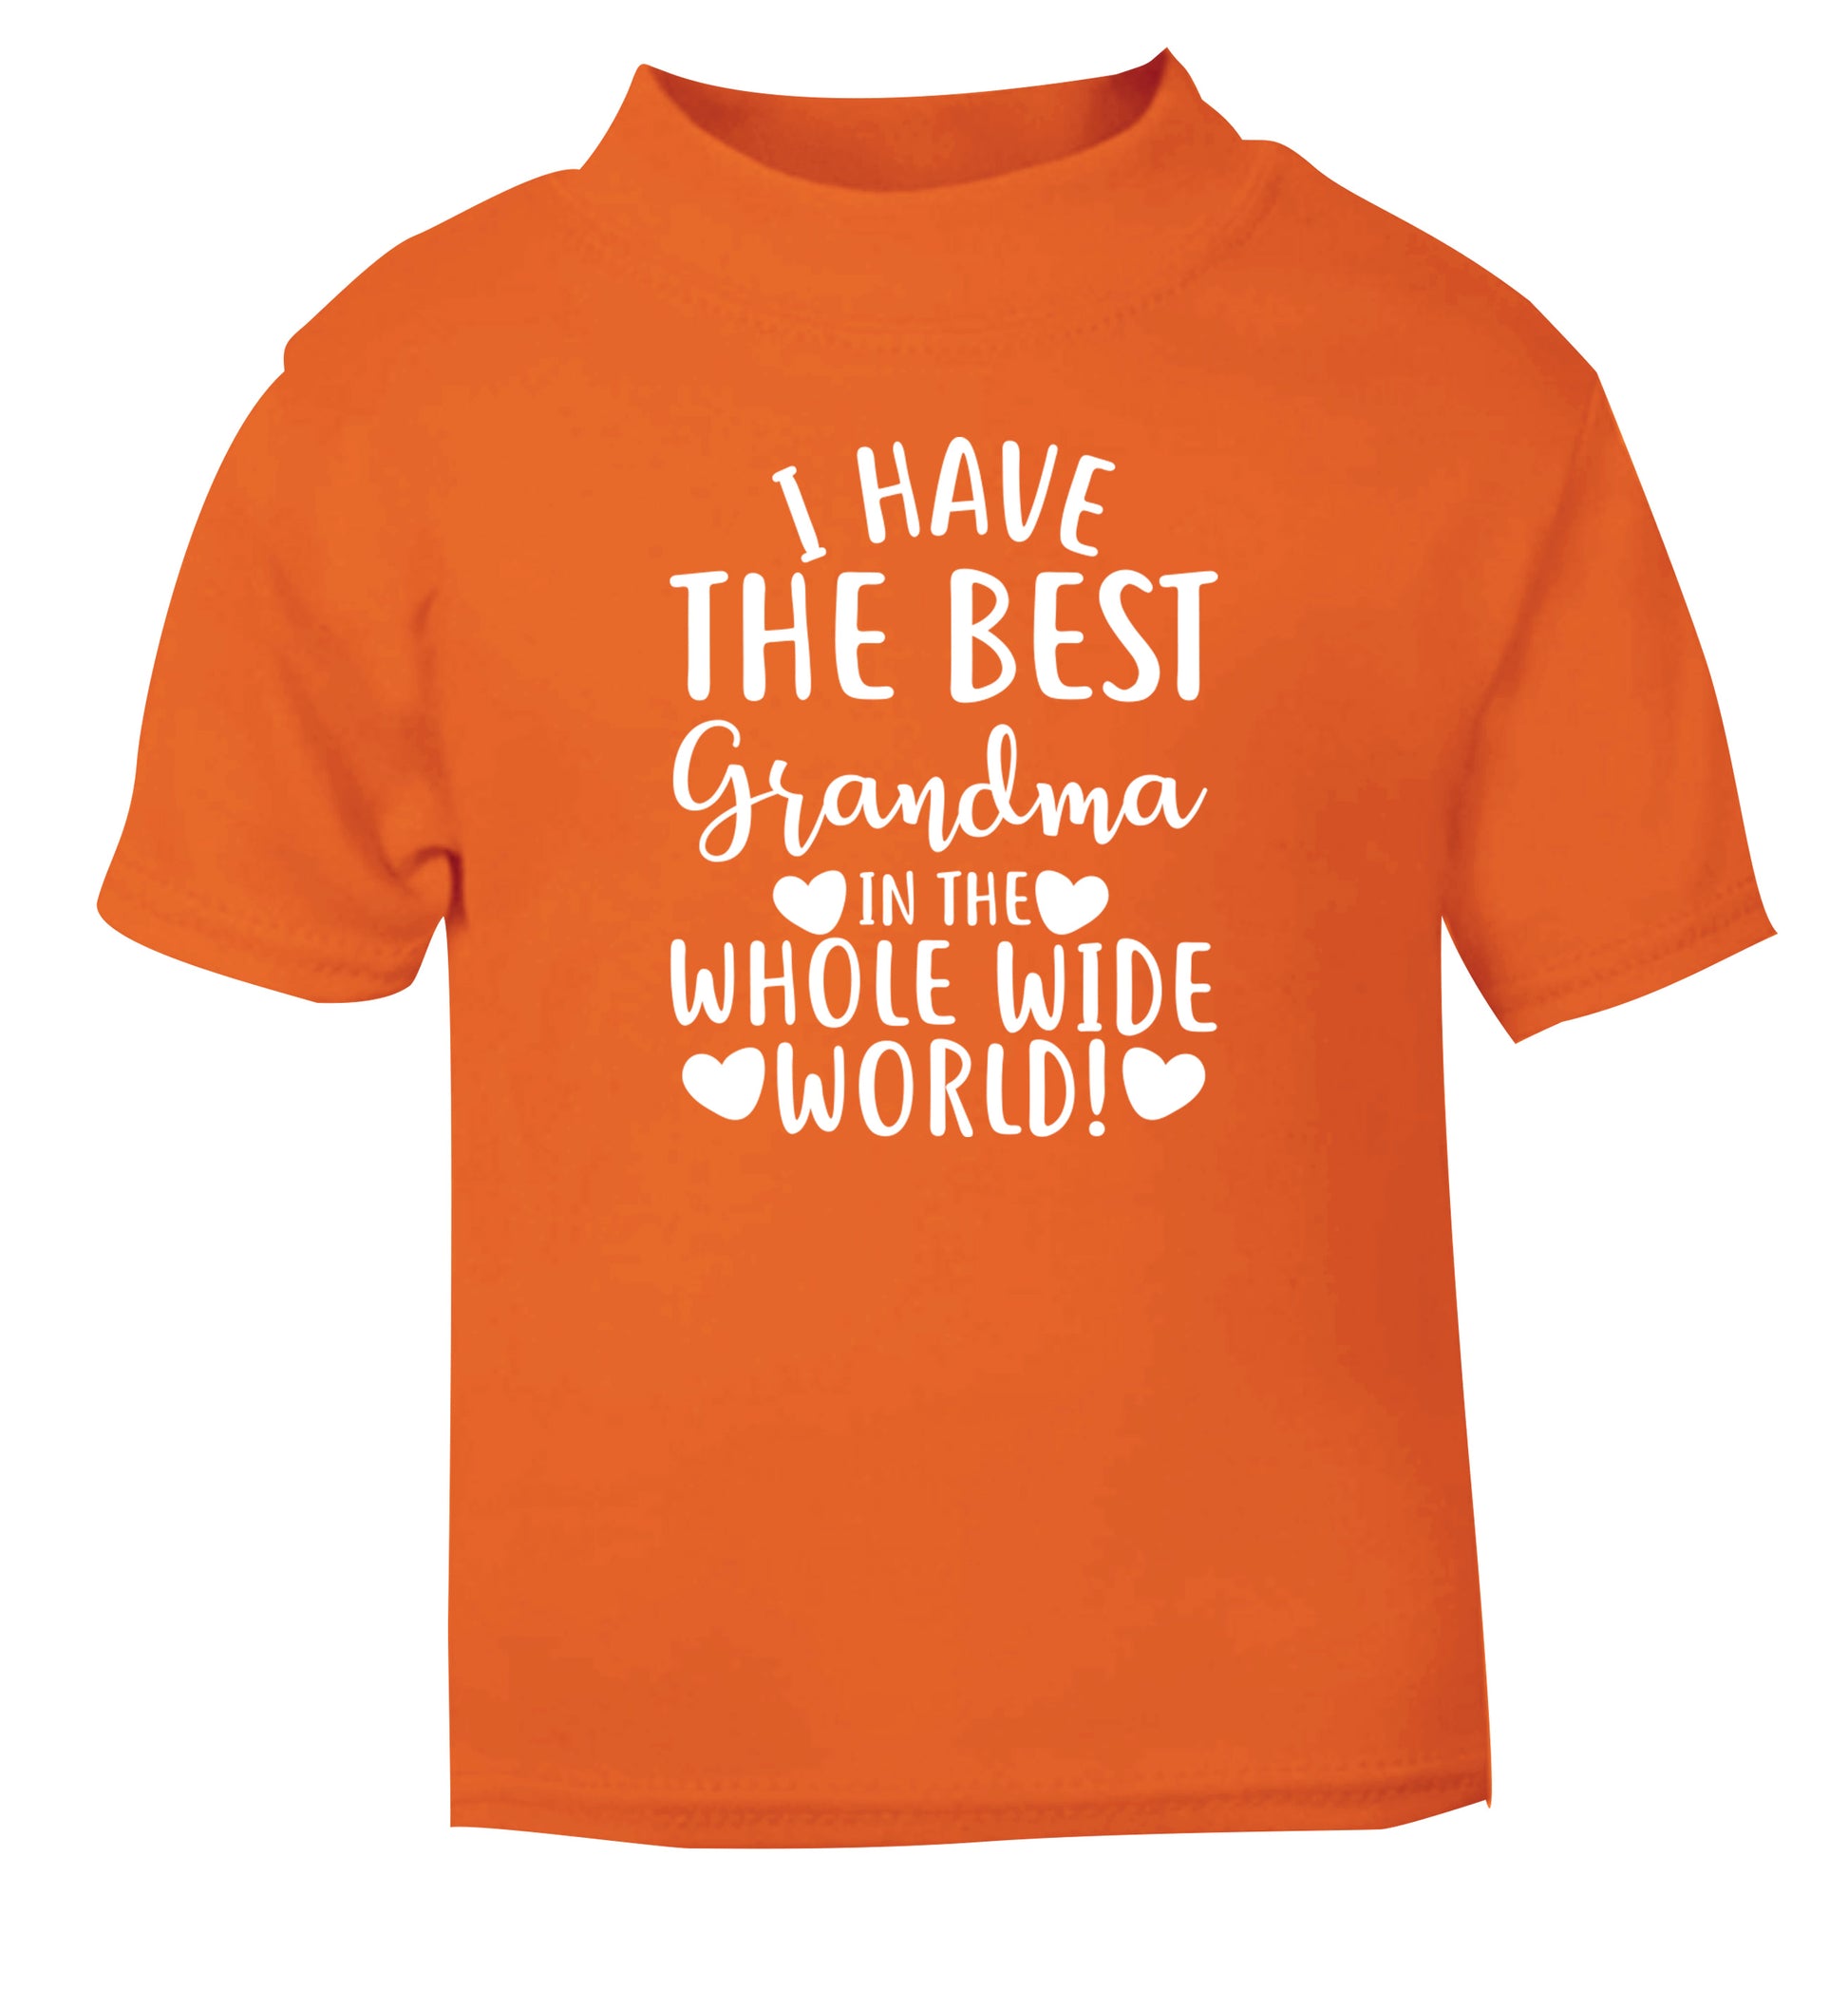 I have the best grandma in the whole wide world! orange Baby Toddler Tshirt 2 Years